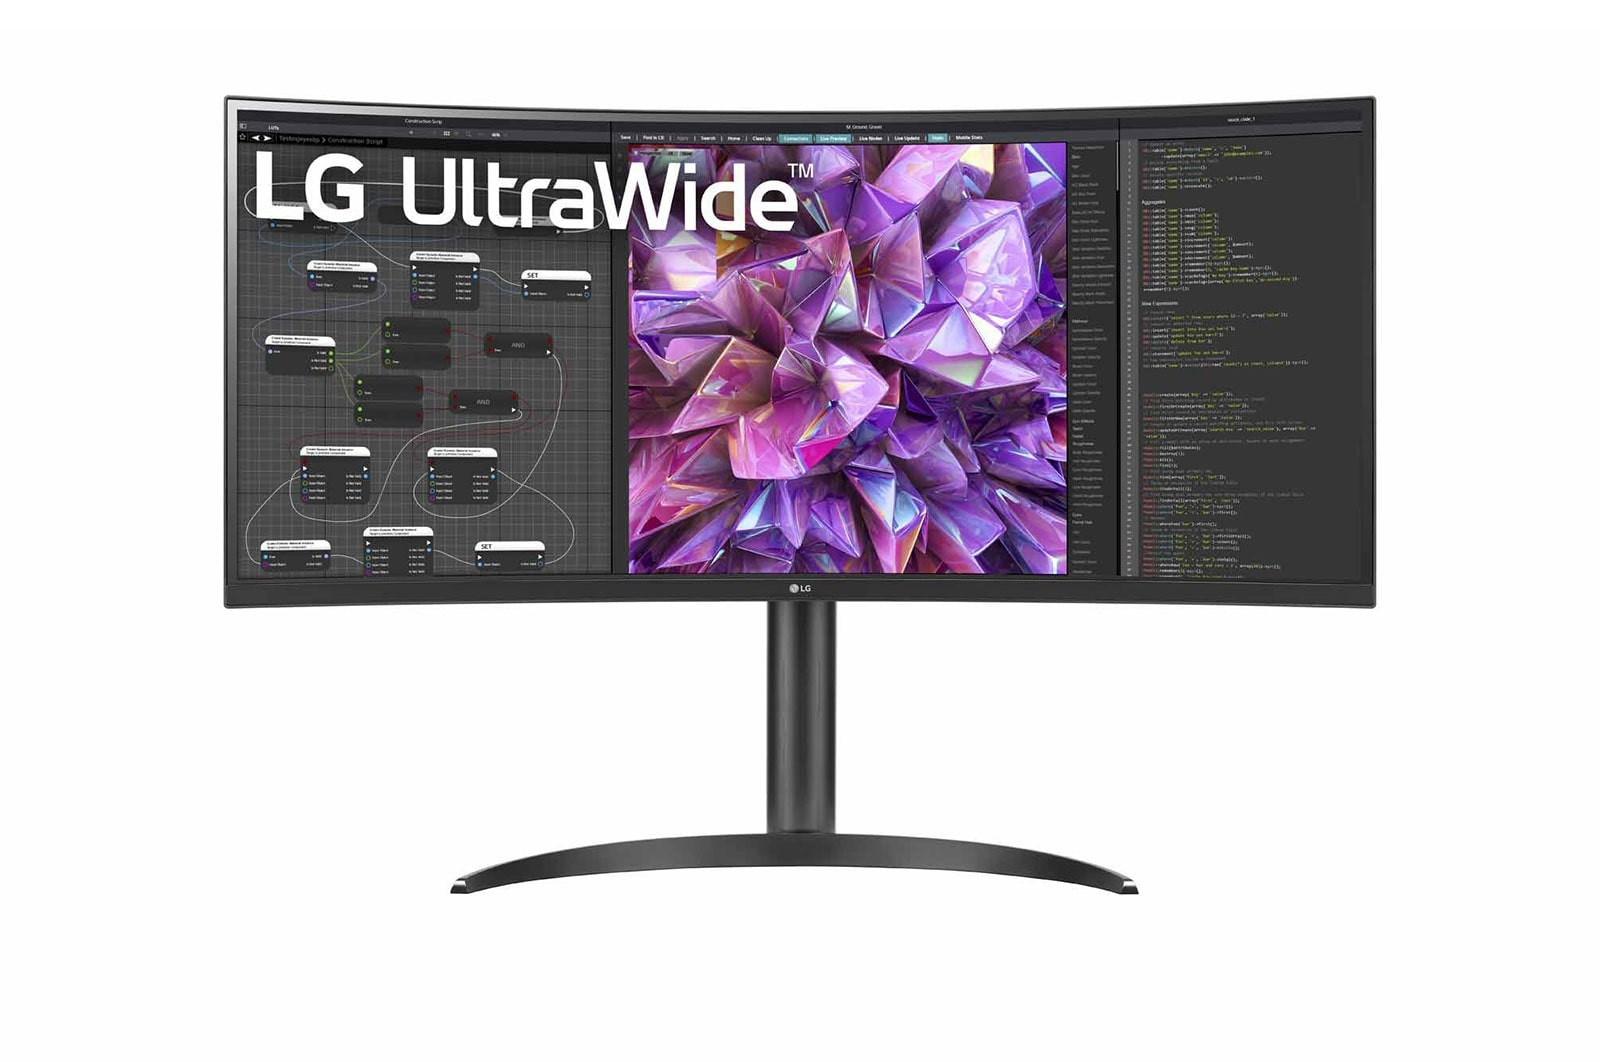 LG discover monitors « here